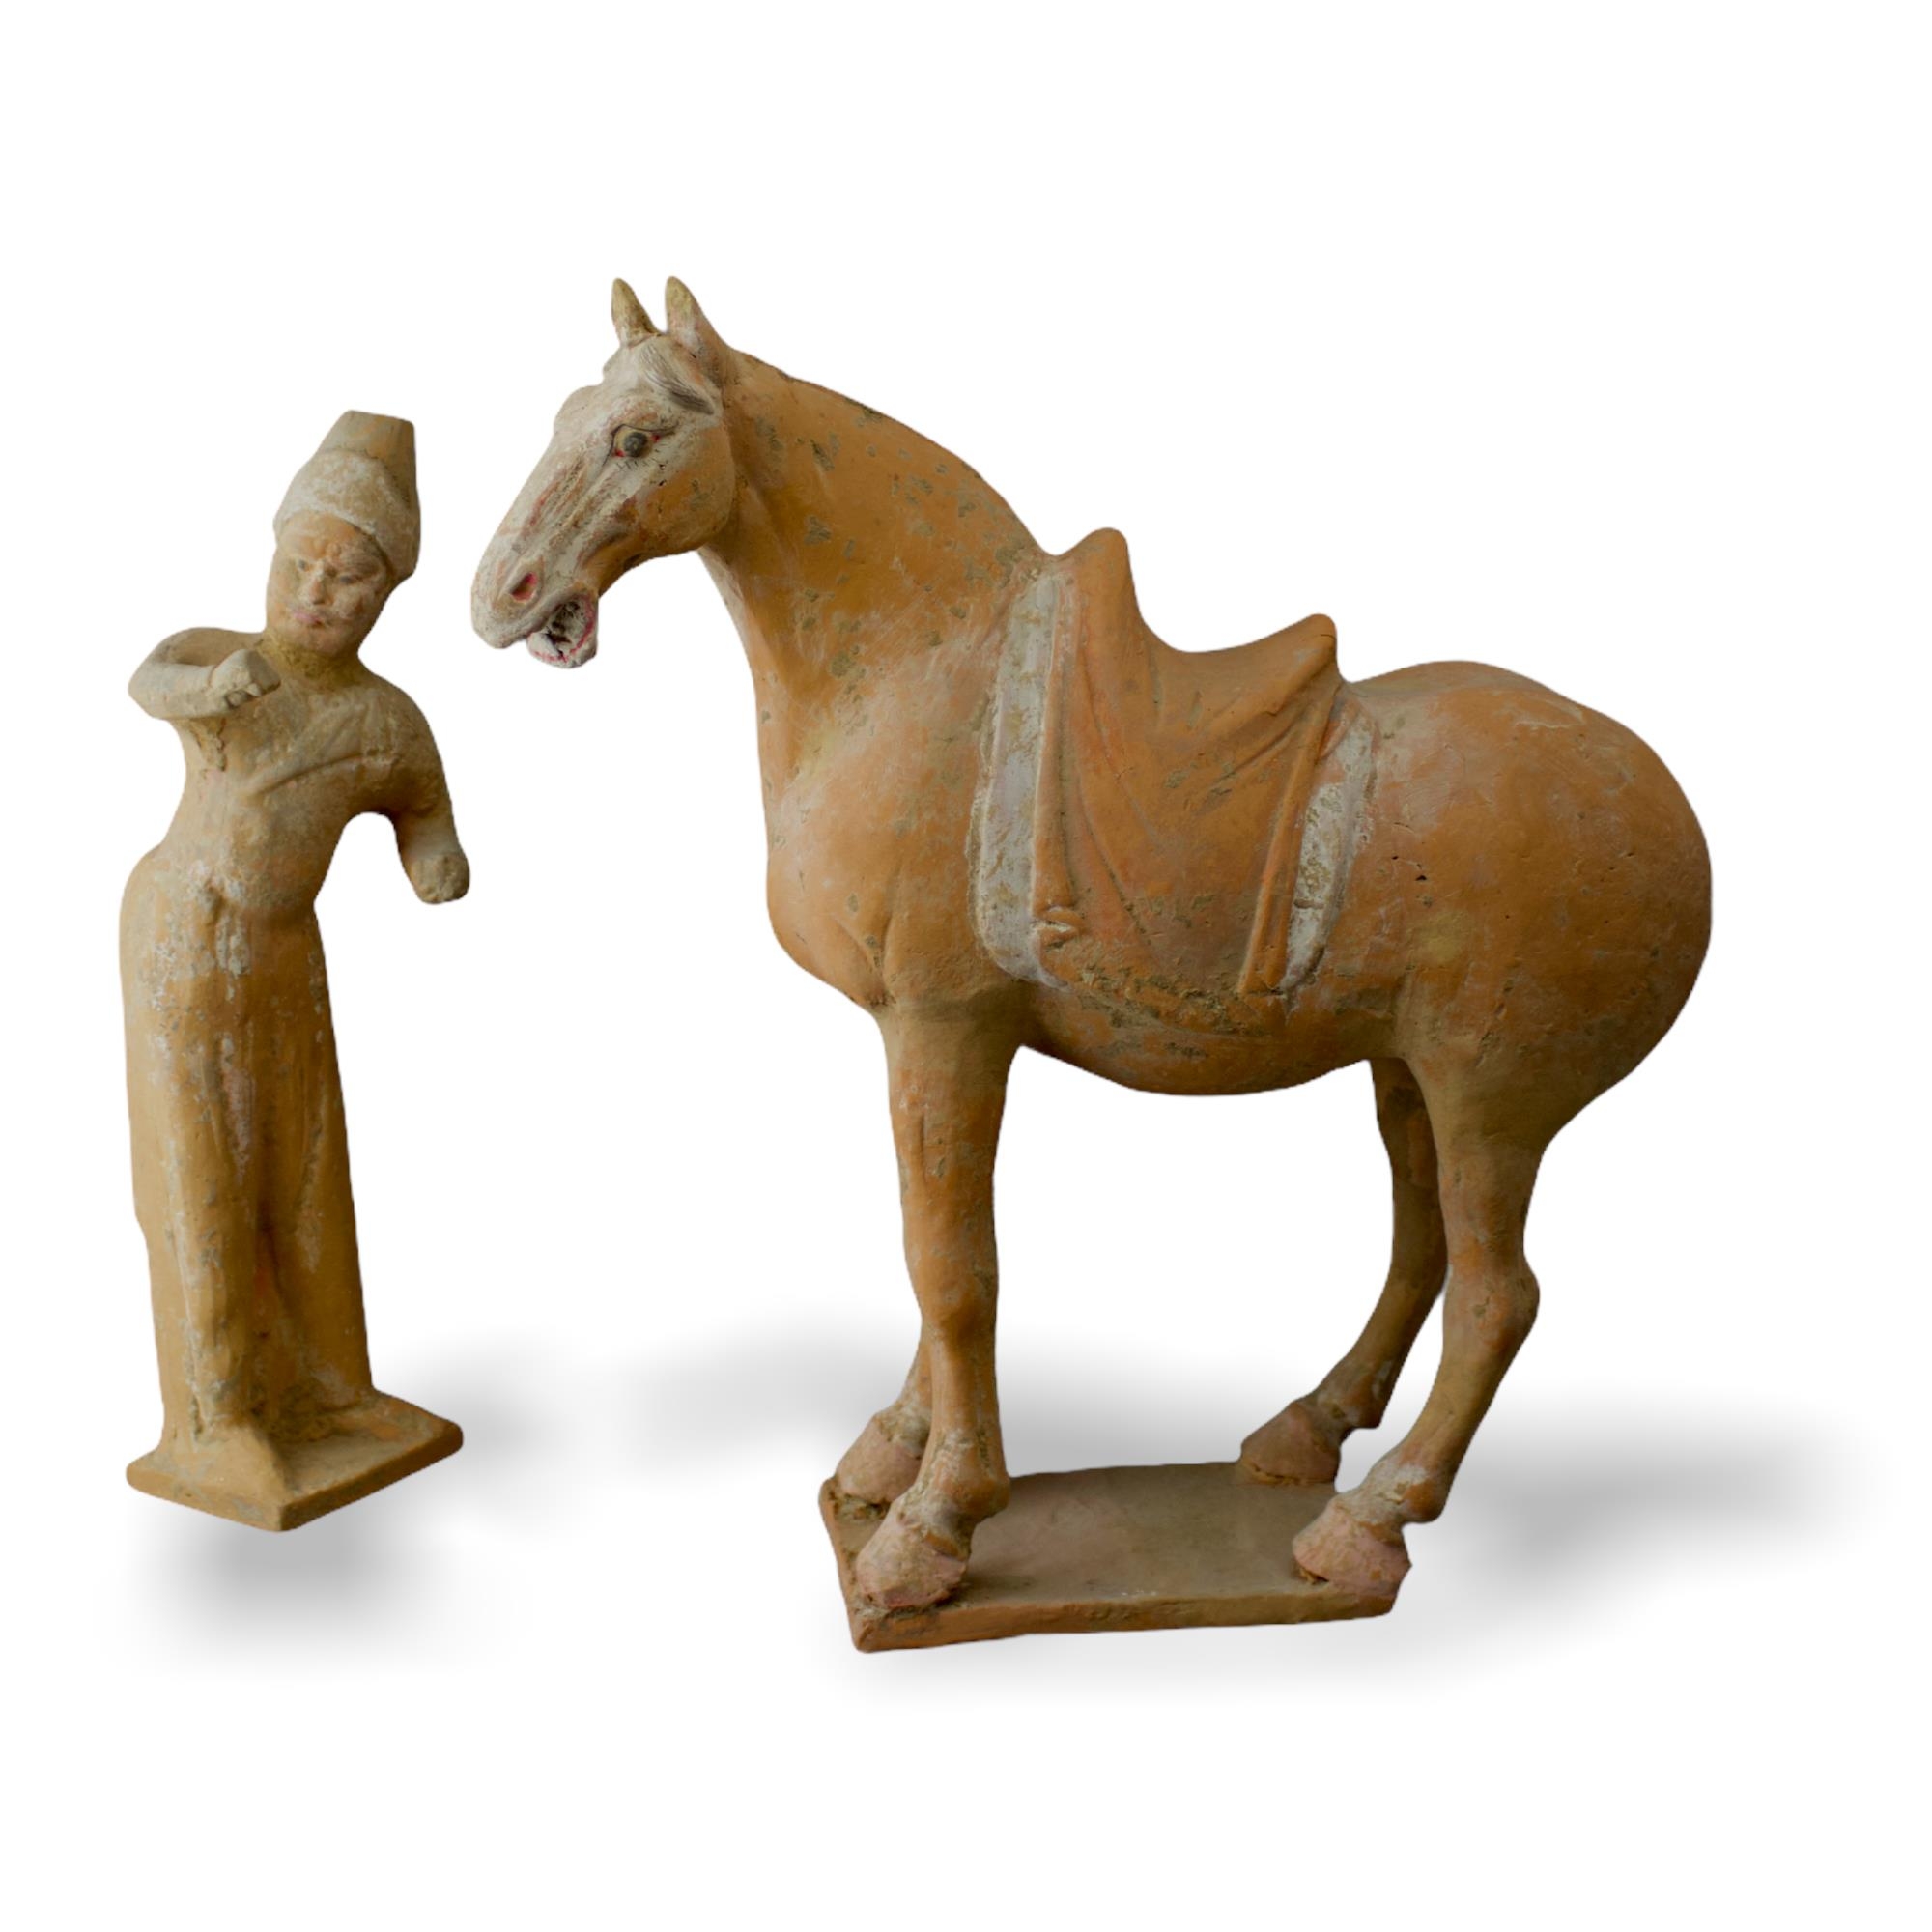 A Painted Pottery Model of a Horse and Foreign Groom, Tang Dynasty - - Horse H 36.5cm - - The